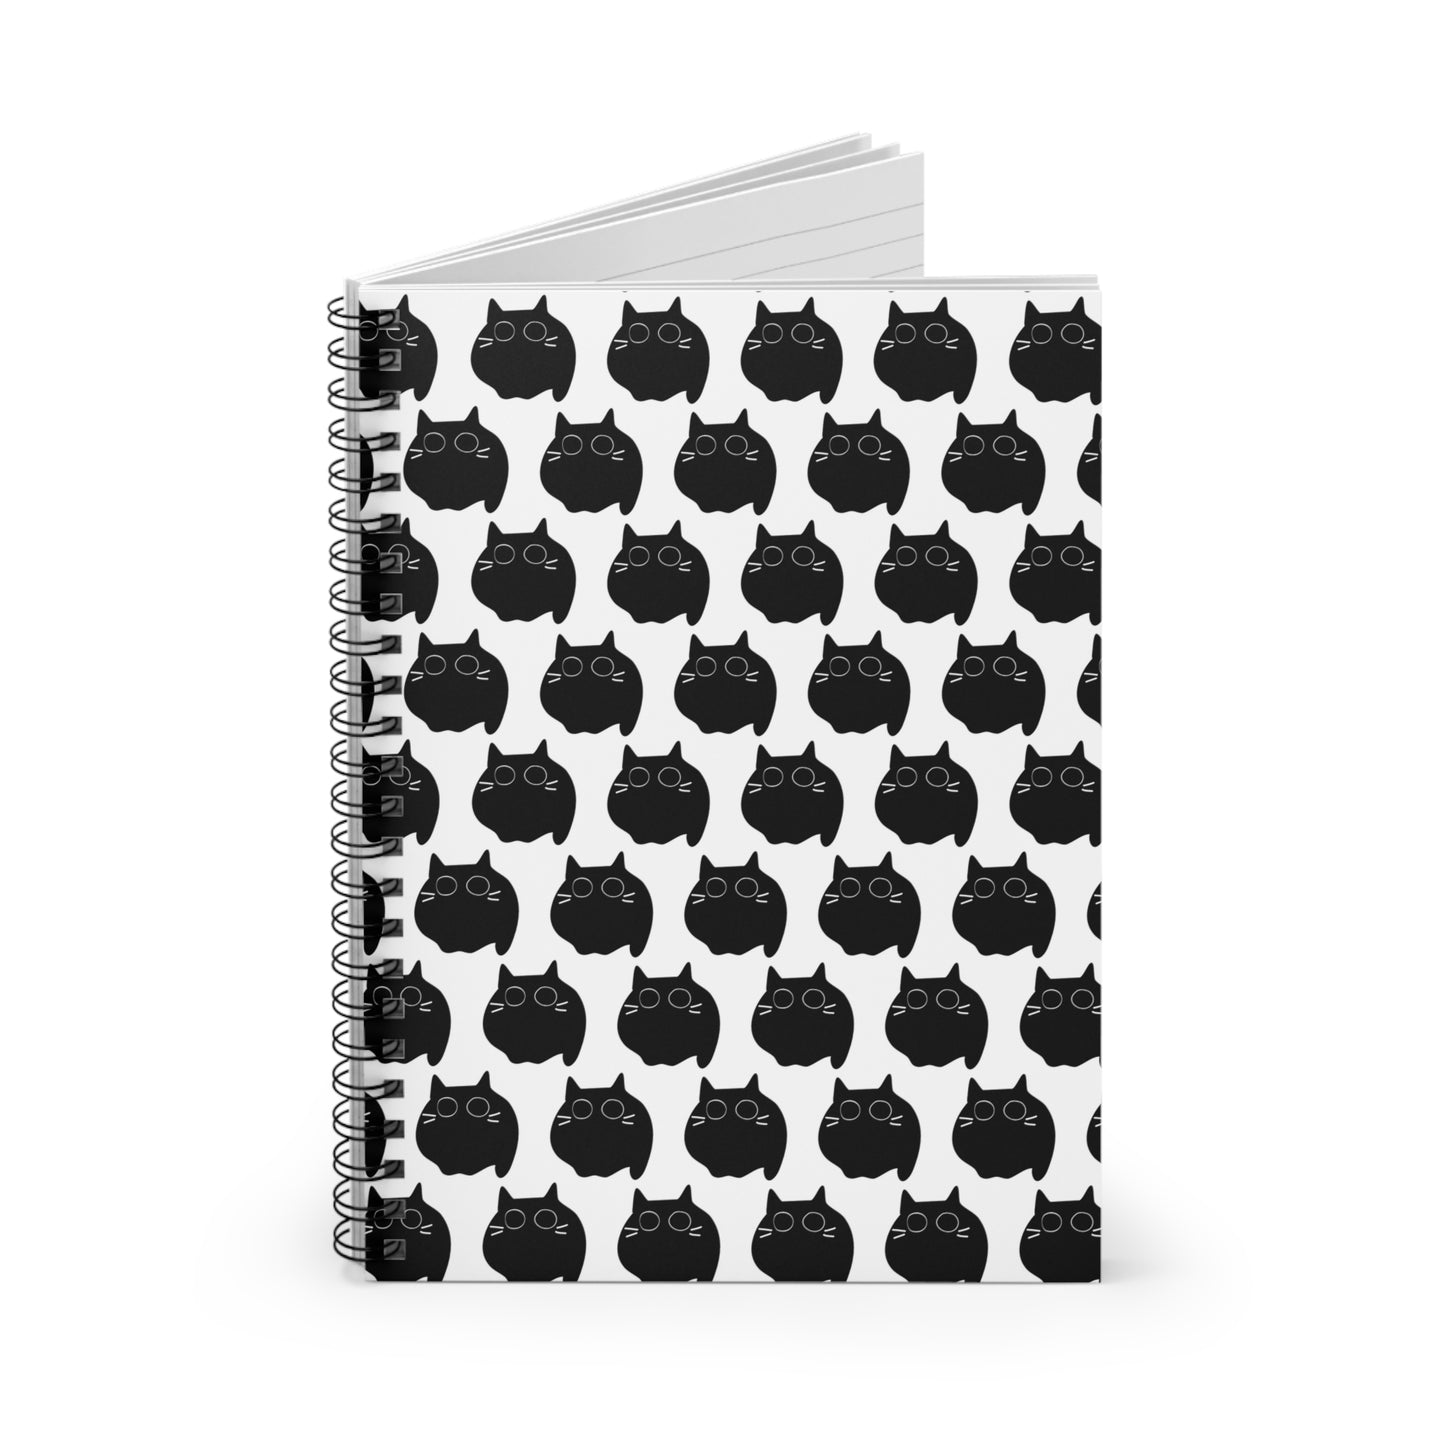 Large Eyed Black Lump Kitty Spiral Notebook - Ruled Line